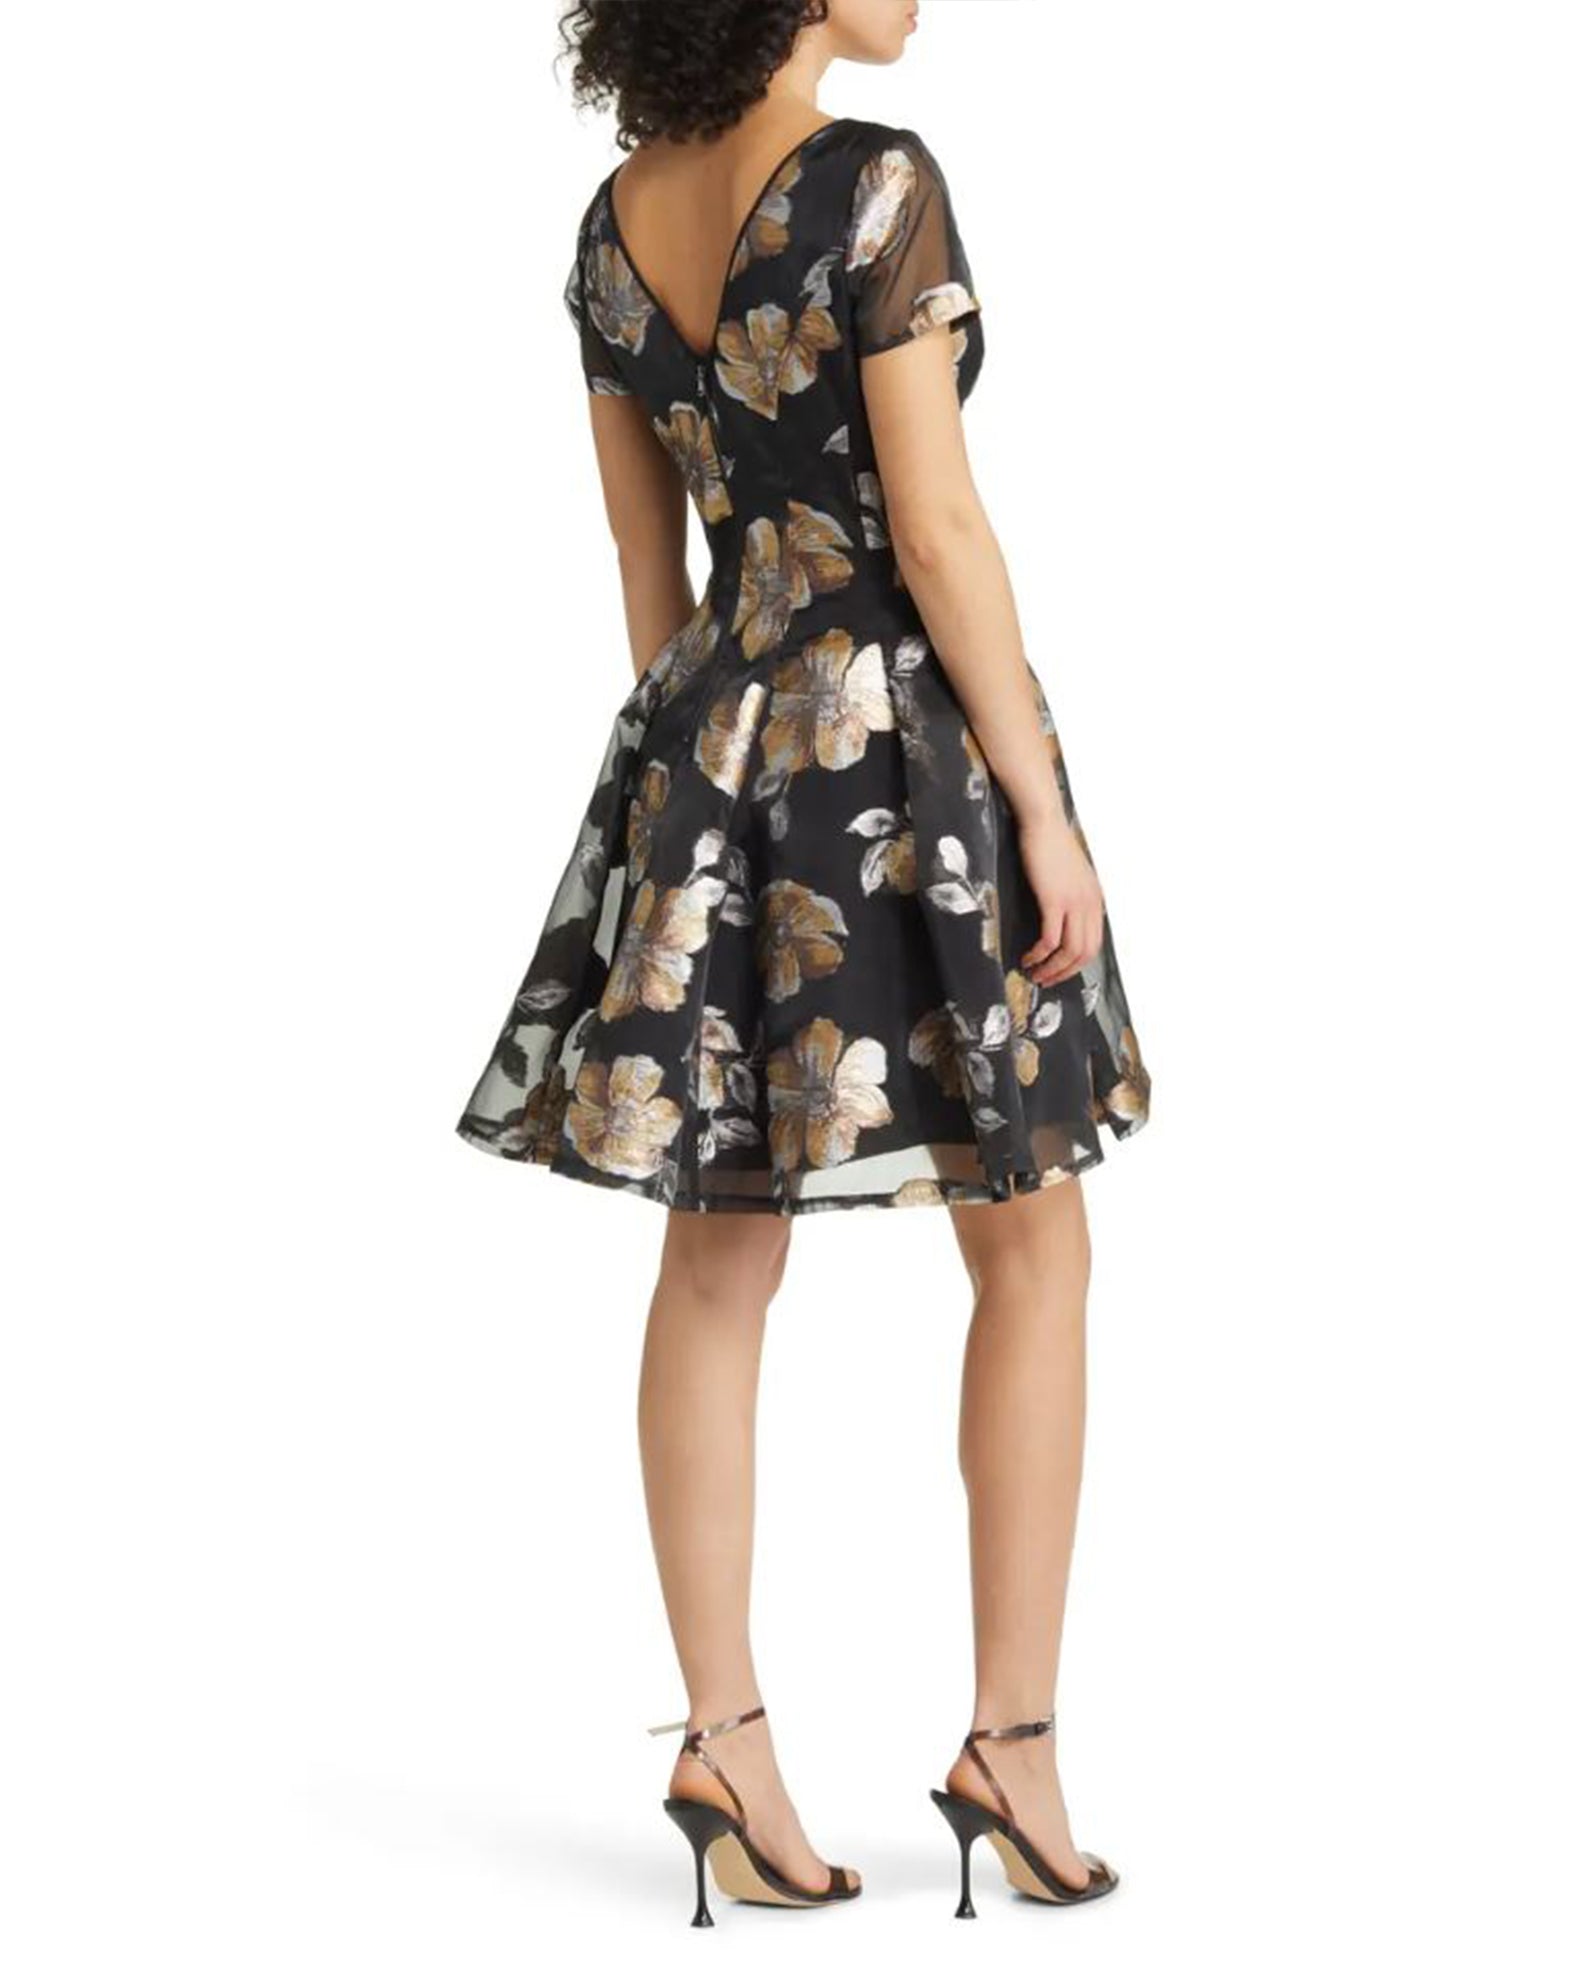 Buy Online Floral Jacquard Organza Fit & Flare Dress for Women